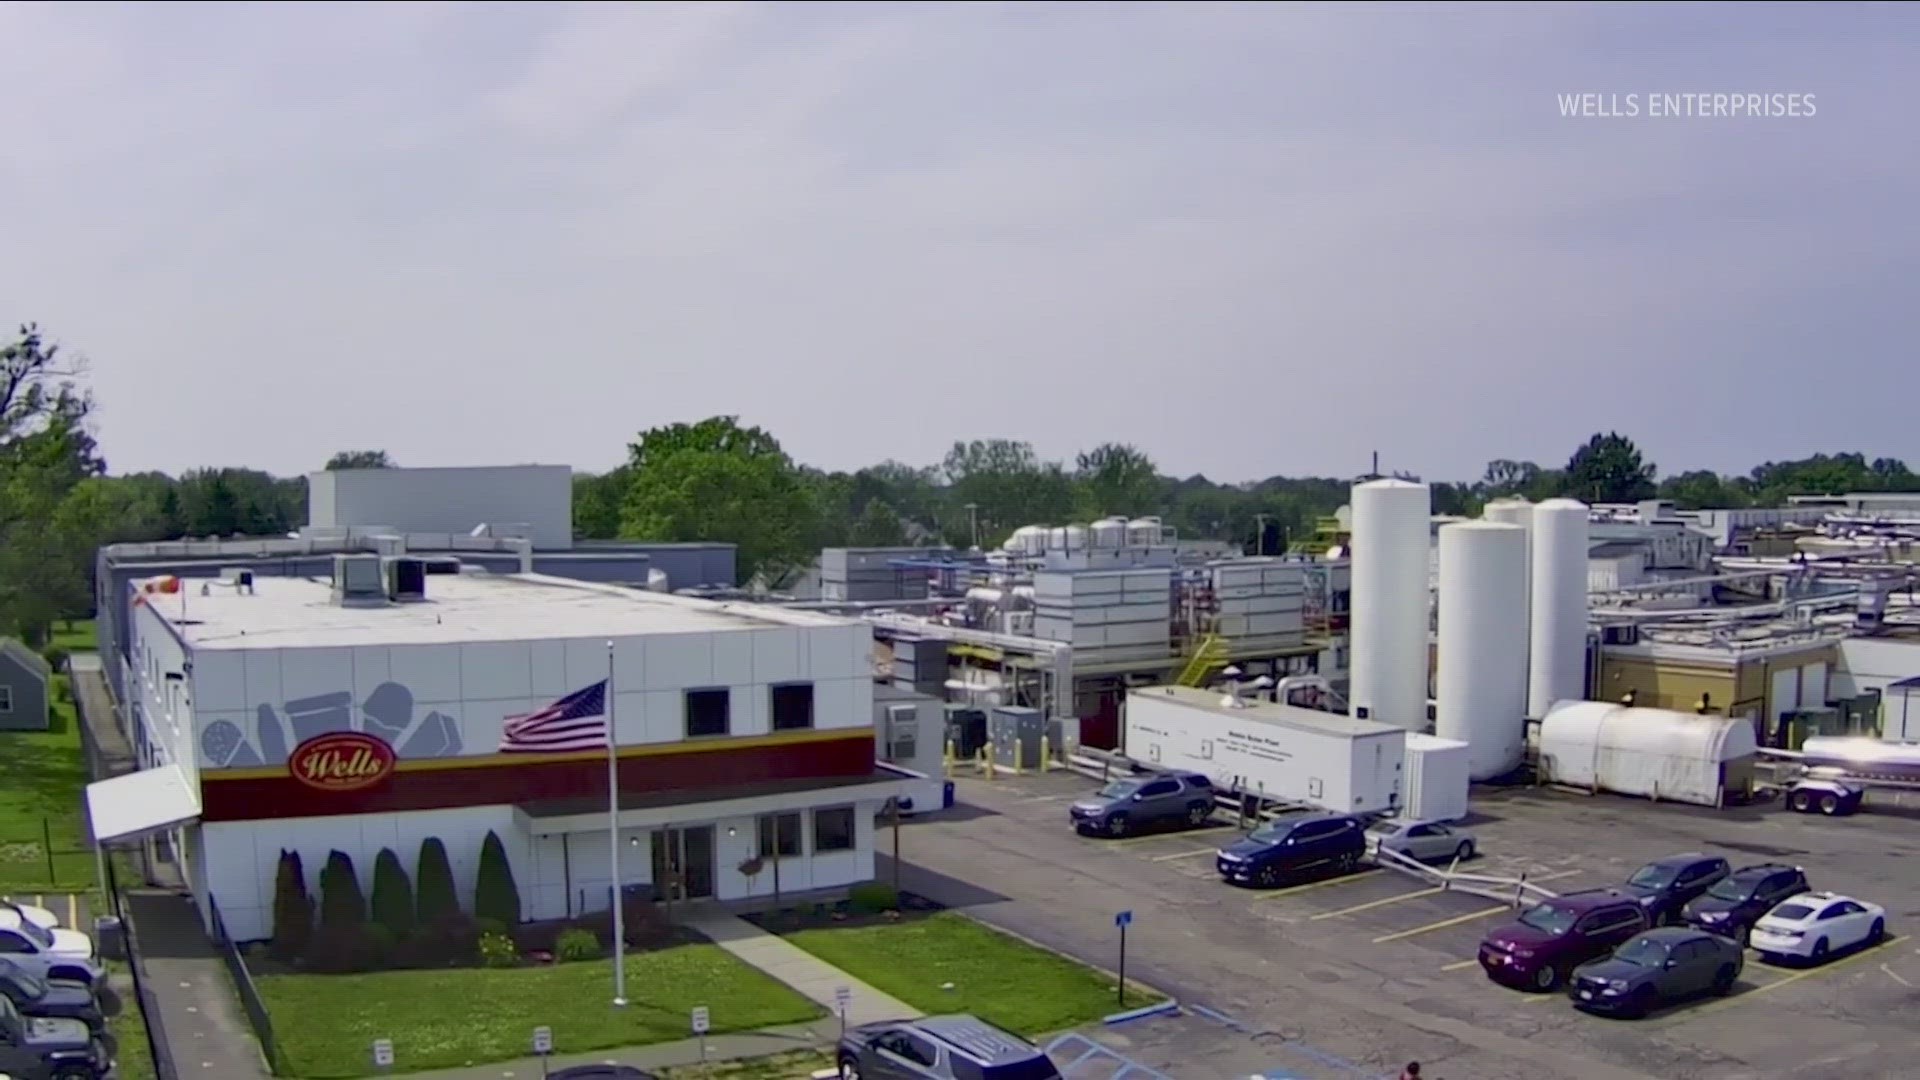 Wells Enterprises is planning to expand its Dunkirk ice cream plant into what it is calling a state-of-the art facility